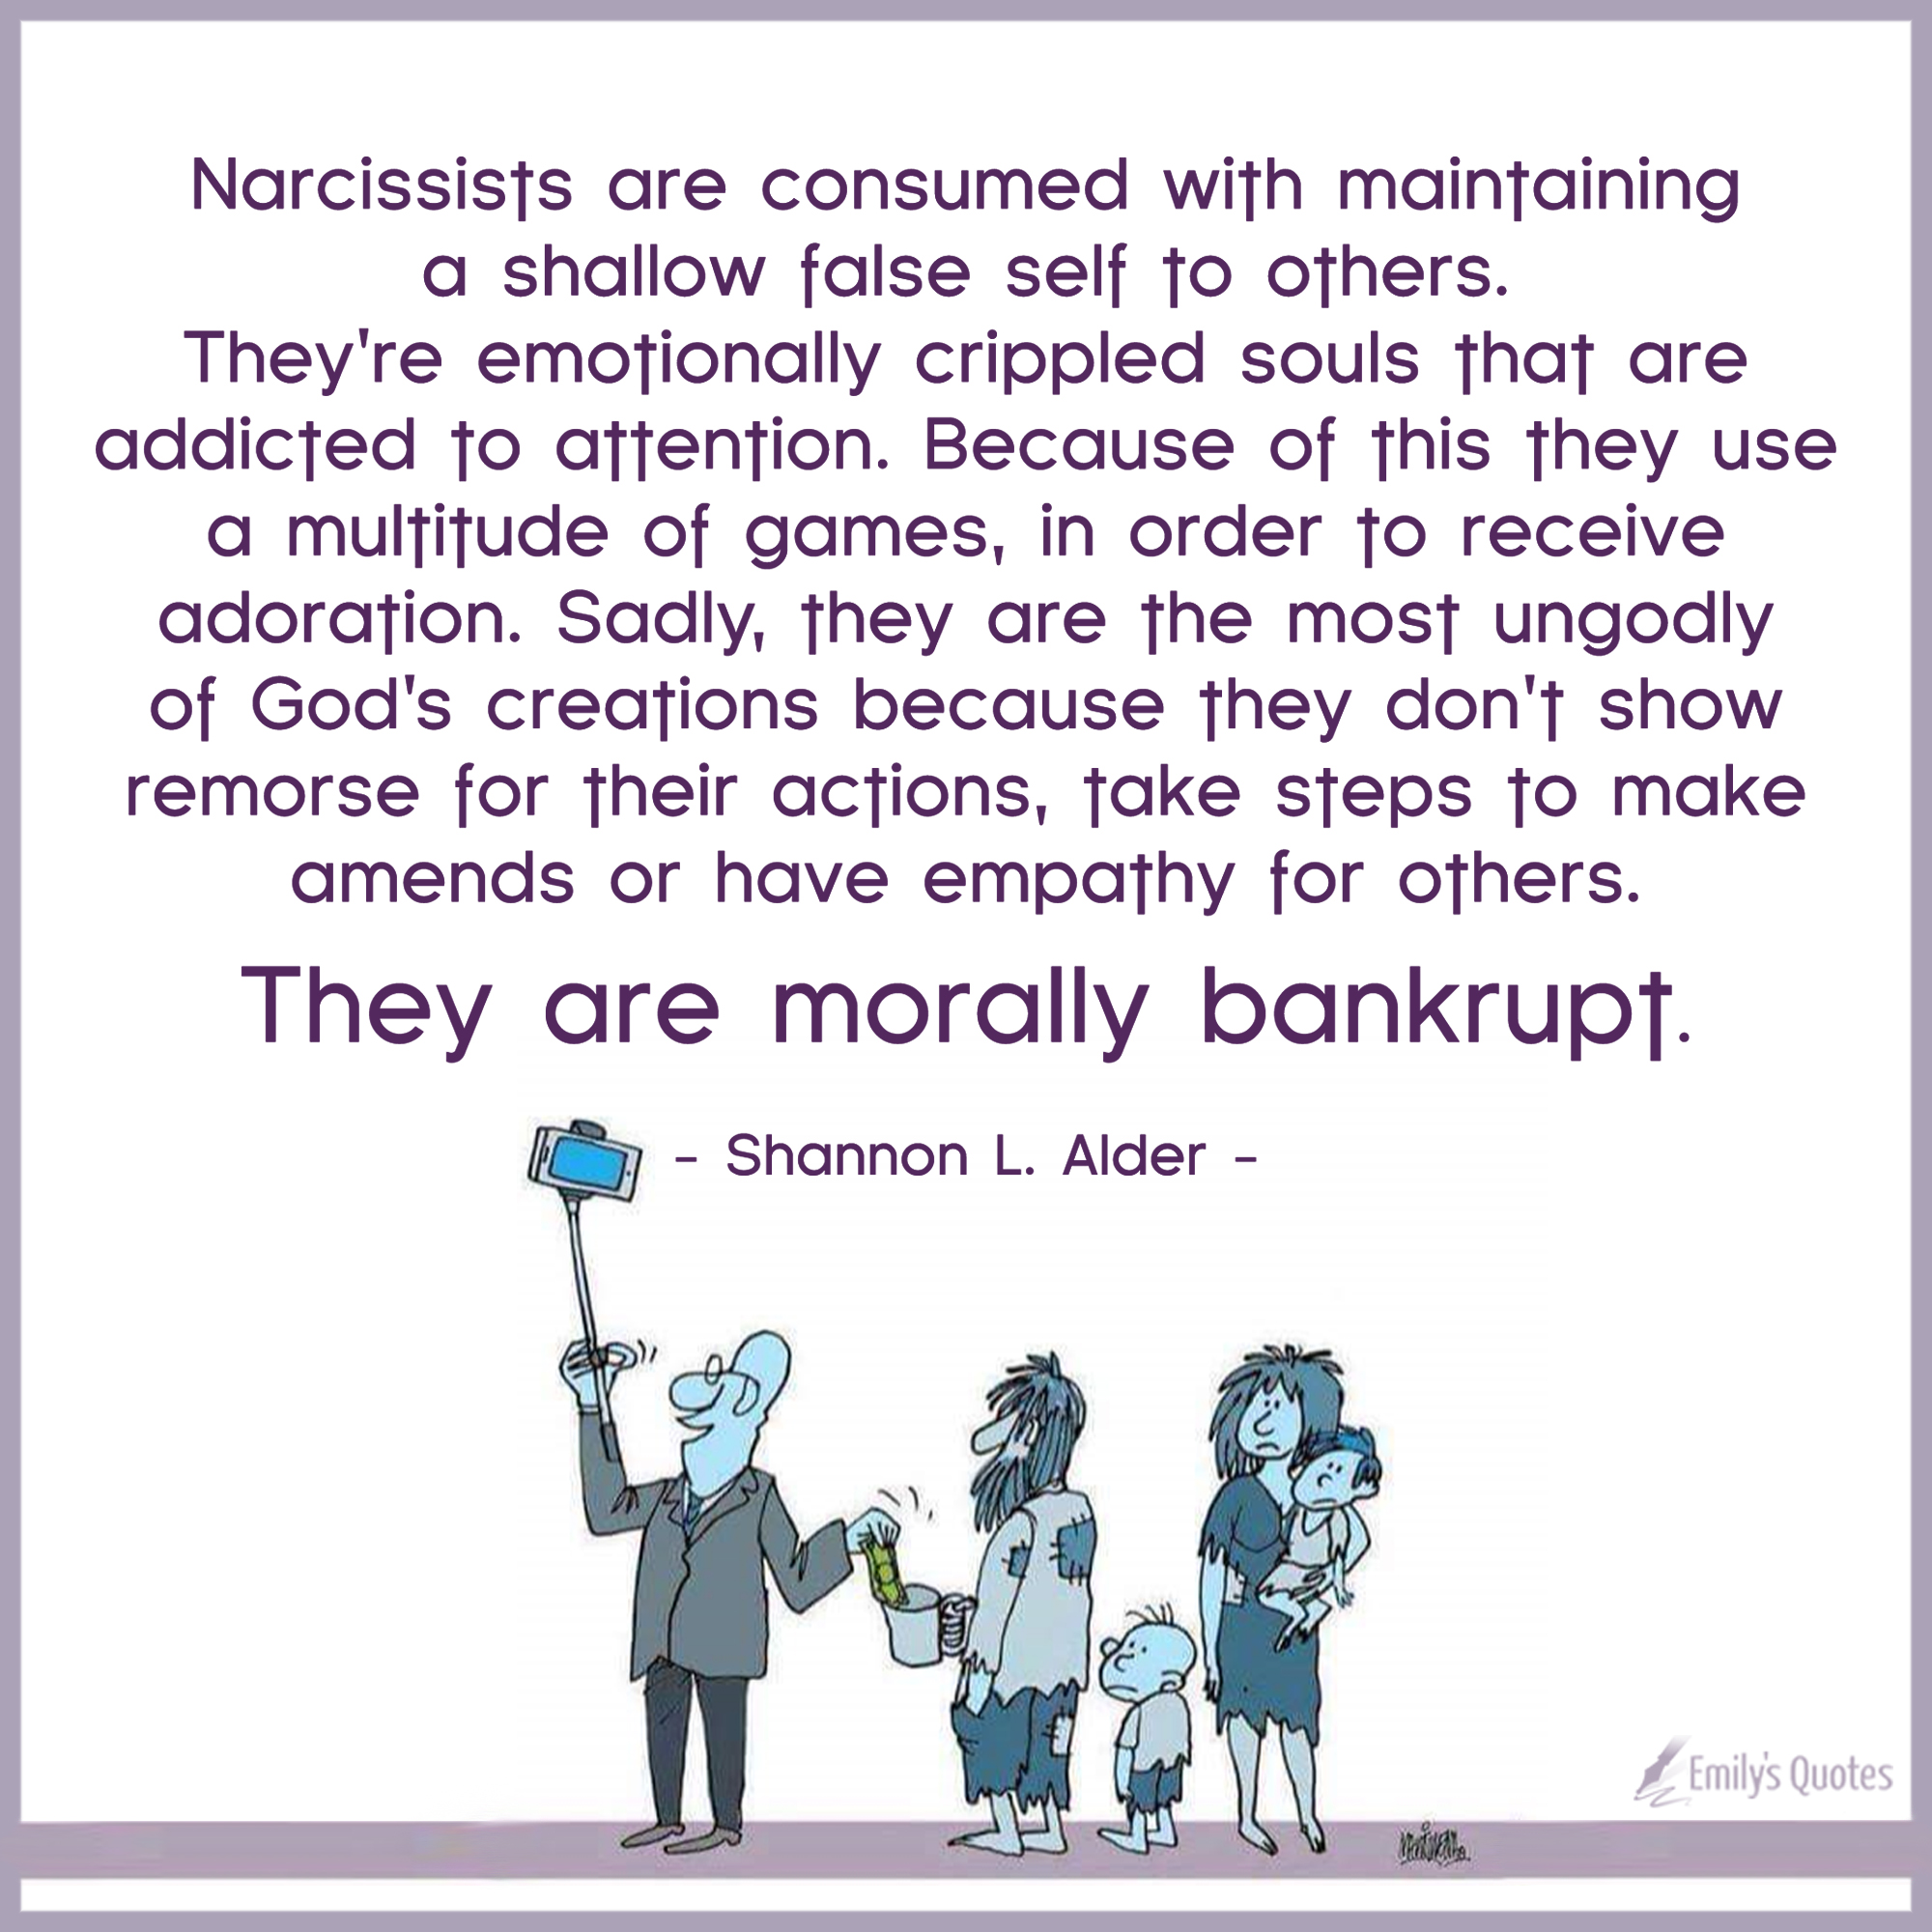 Narcissists are consumed with maintaining a shallow false self to others. They’re emotionally crippled